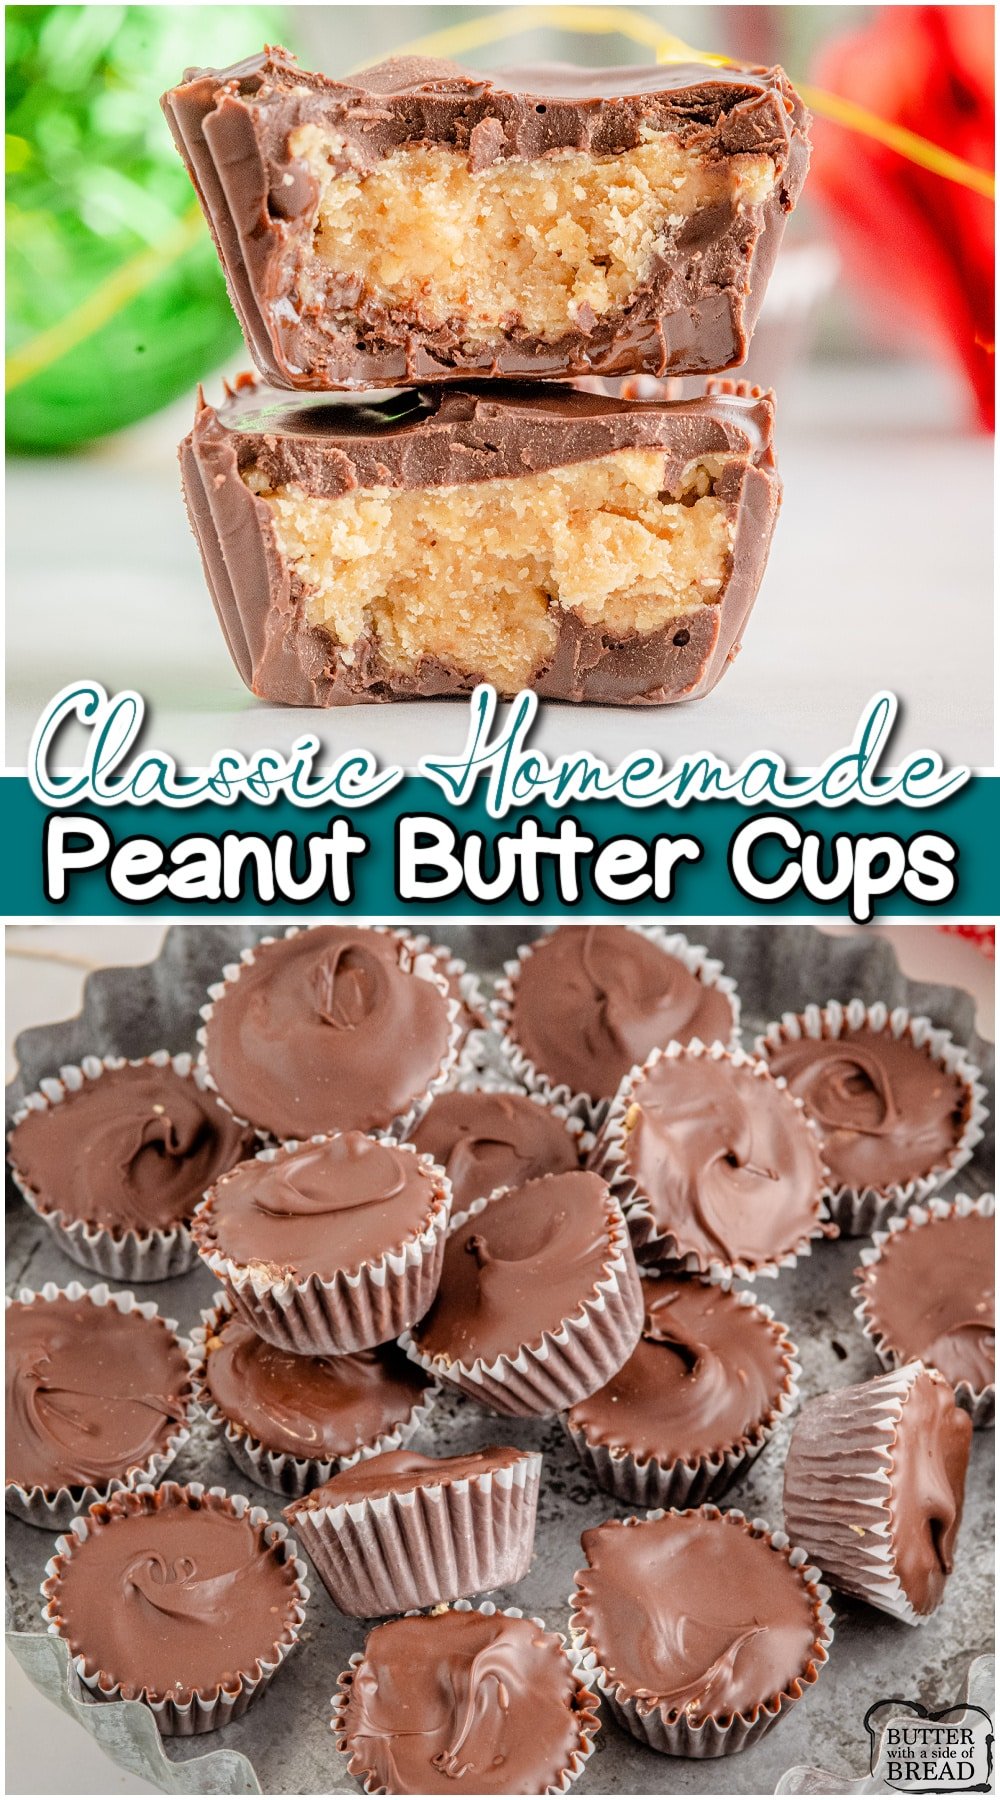 Homemade Peanut Butter Cups made with a handful of ingredients & so much better than store bought! Fun, festive addition to holiday candy trays!